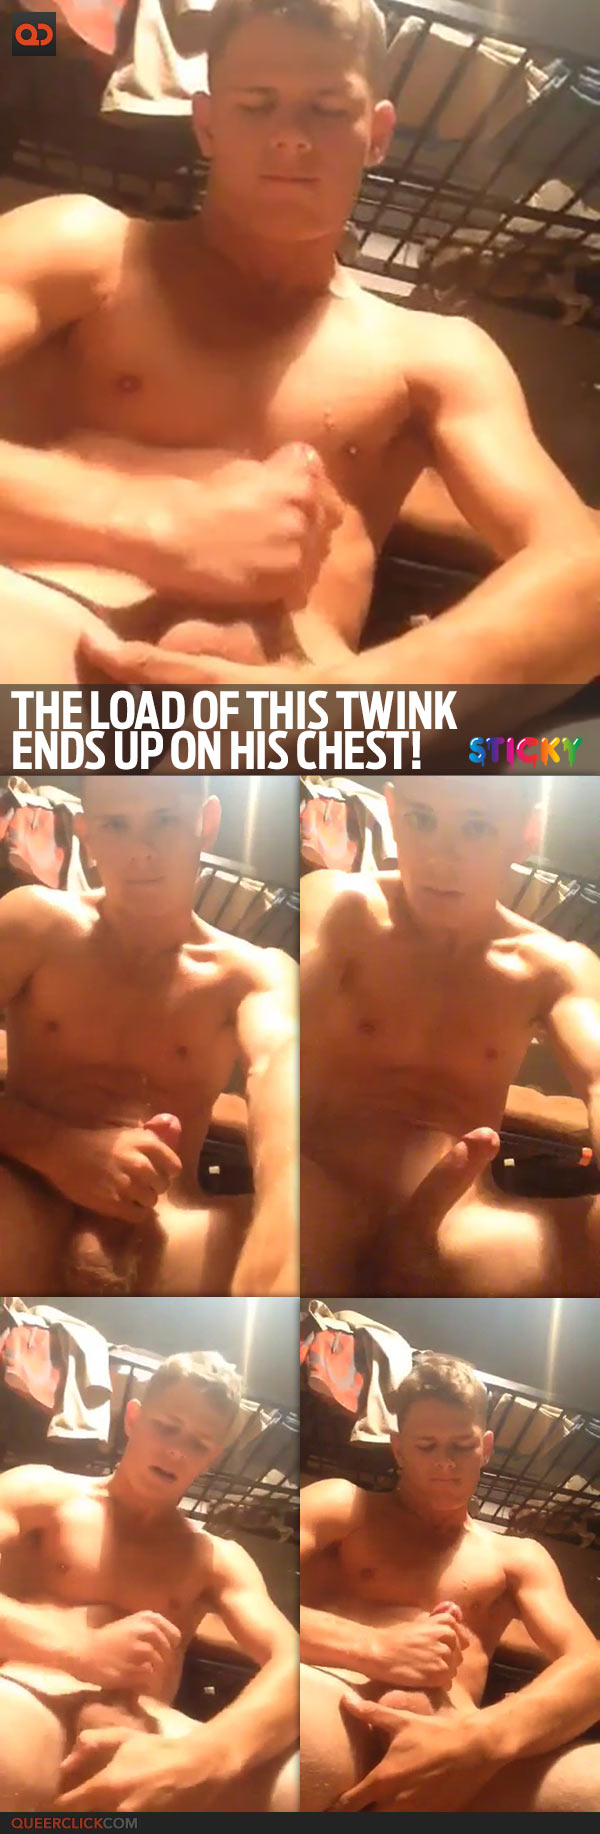 qc-sticky-twink_load_chest-teaser